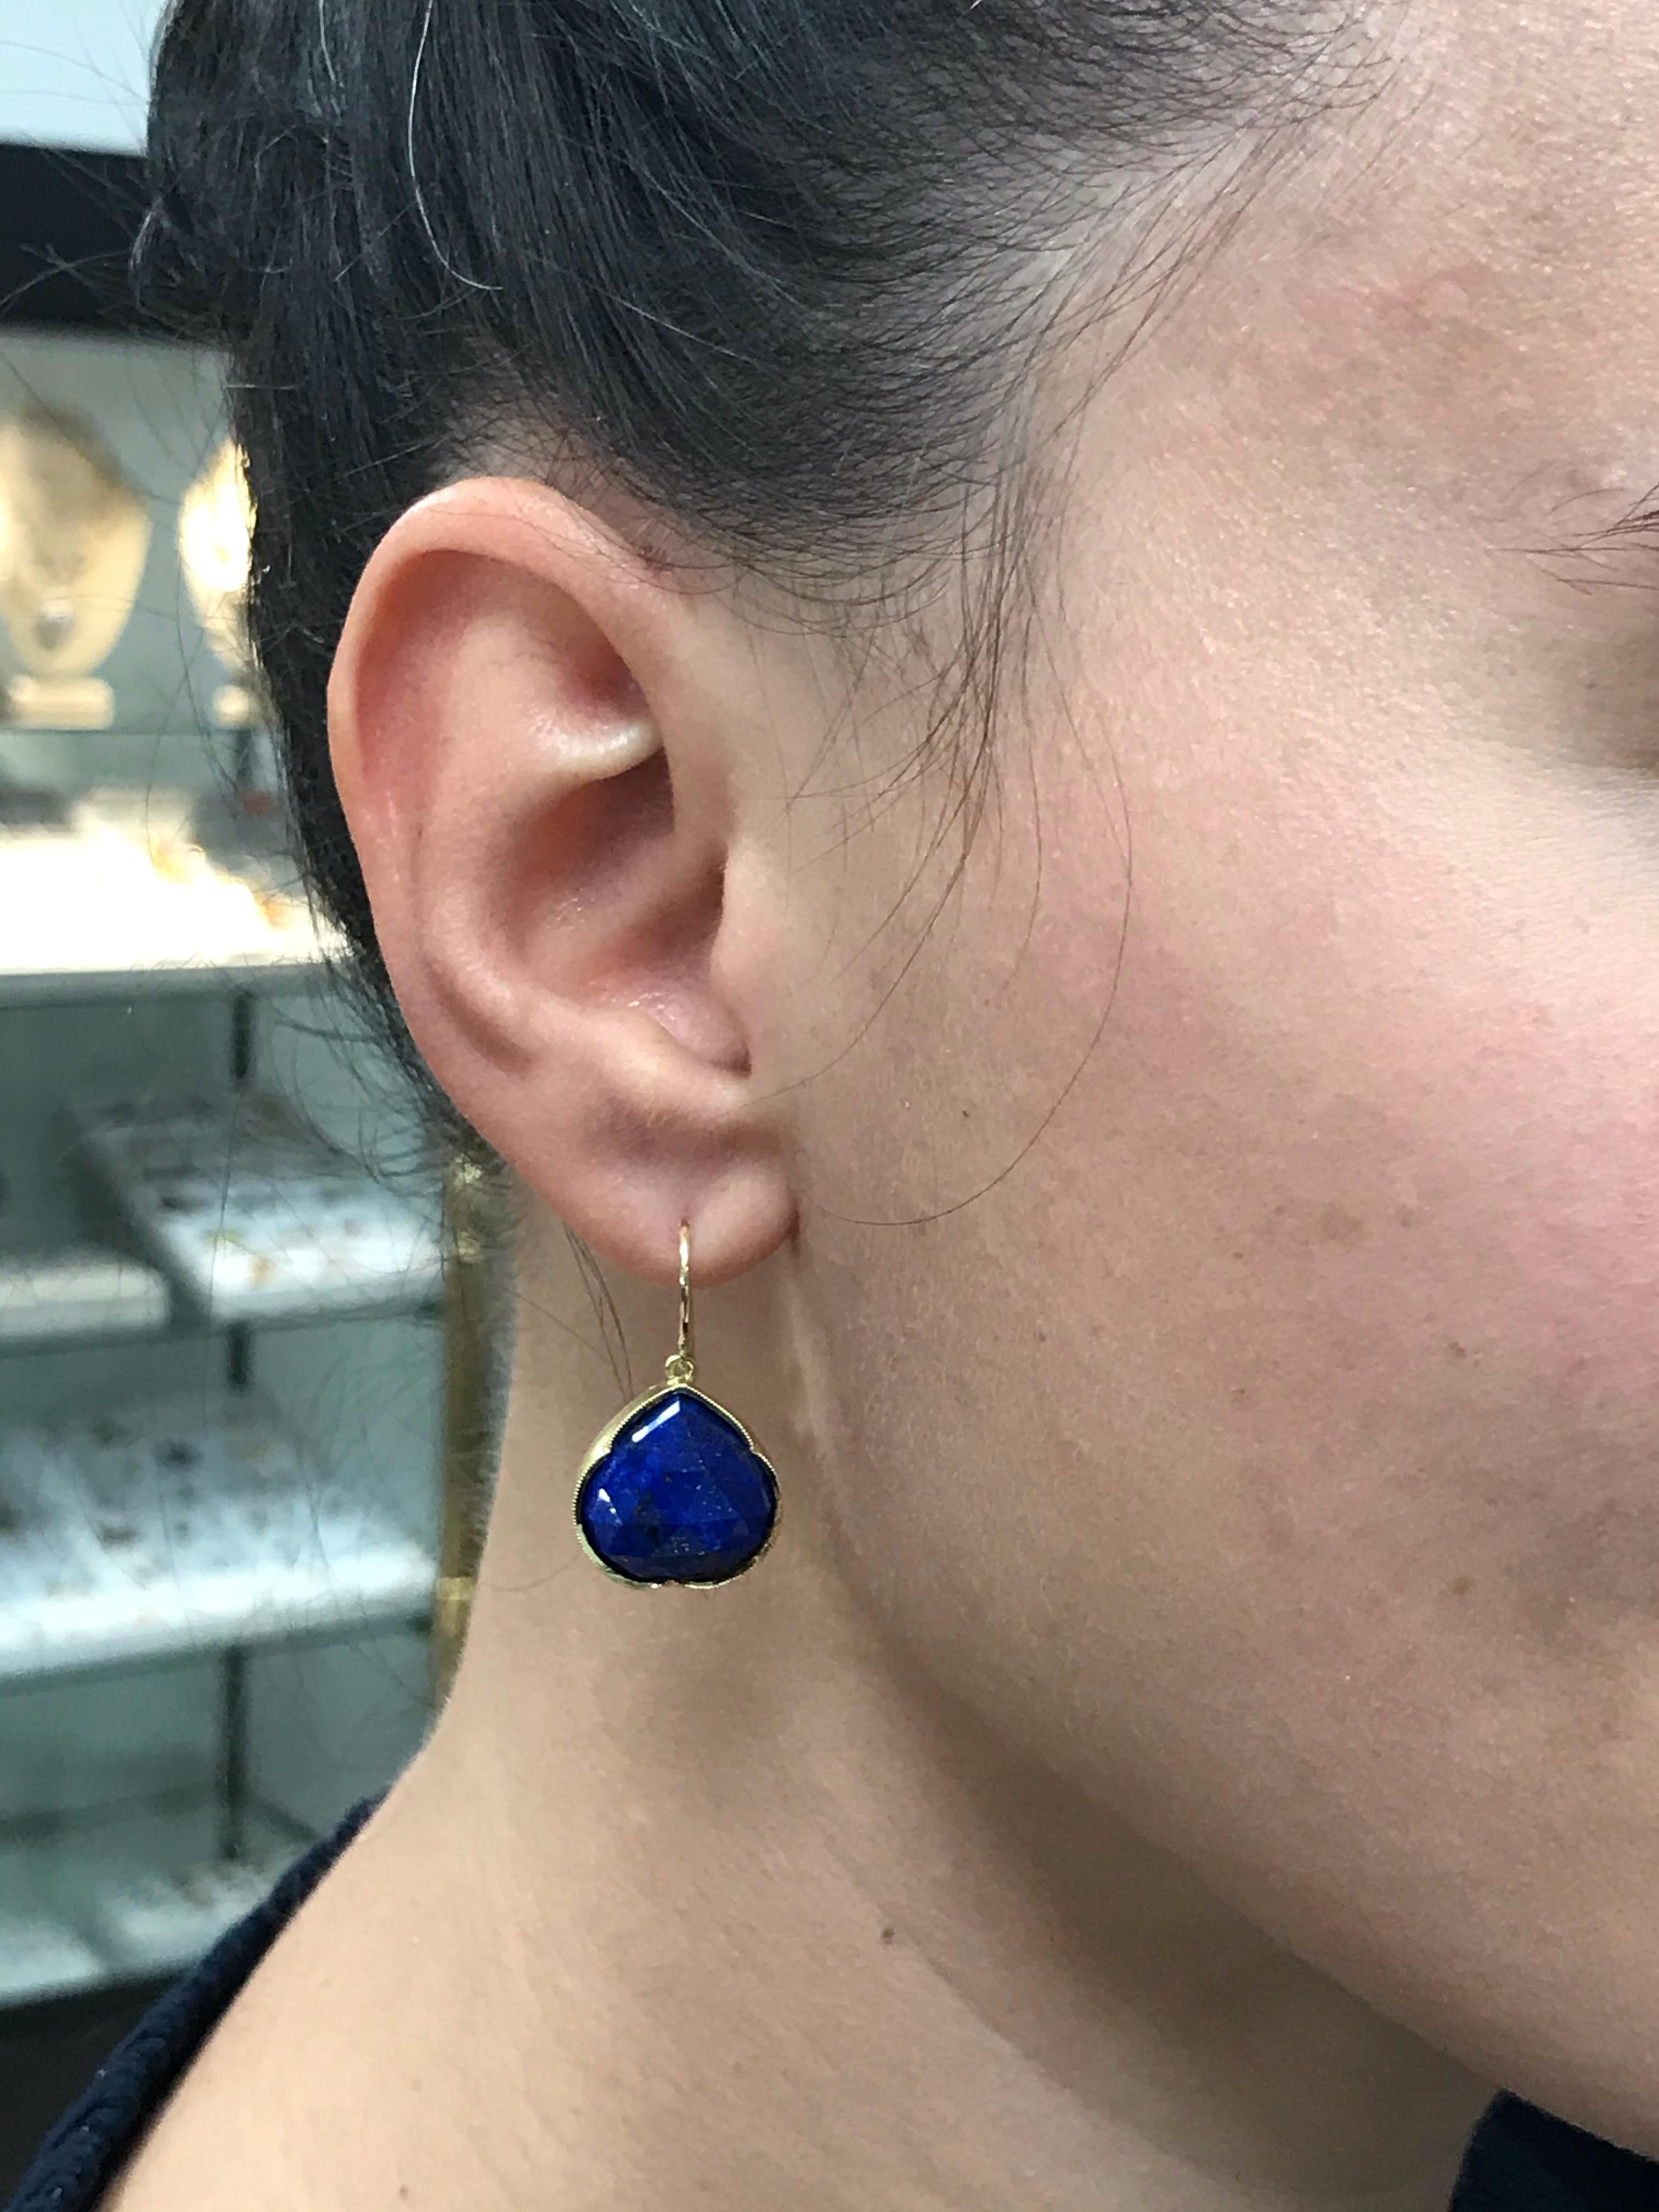 Irene Neuwirth 18k yellow gold earrings with faceted dark blue lapis and French hooks. Stamped by Irene Neuwirth maker's mark and a hallmark for 18k gold. Measurements: 1 1/4